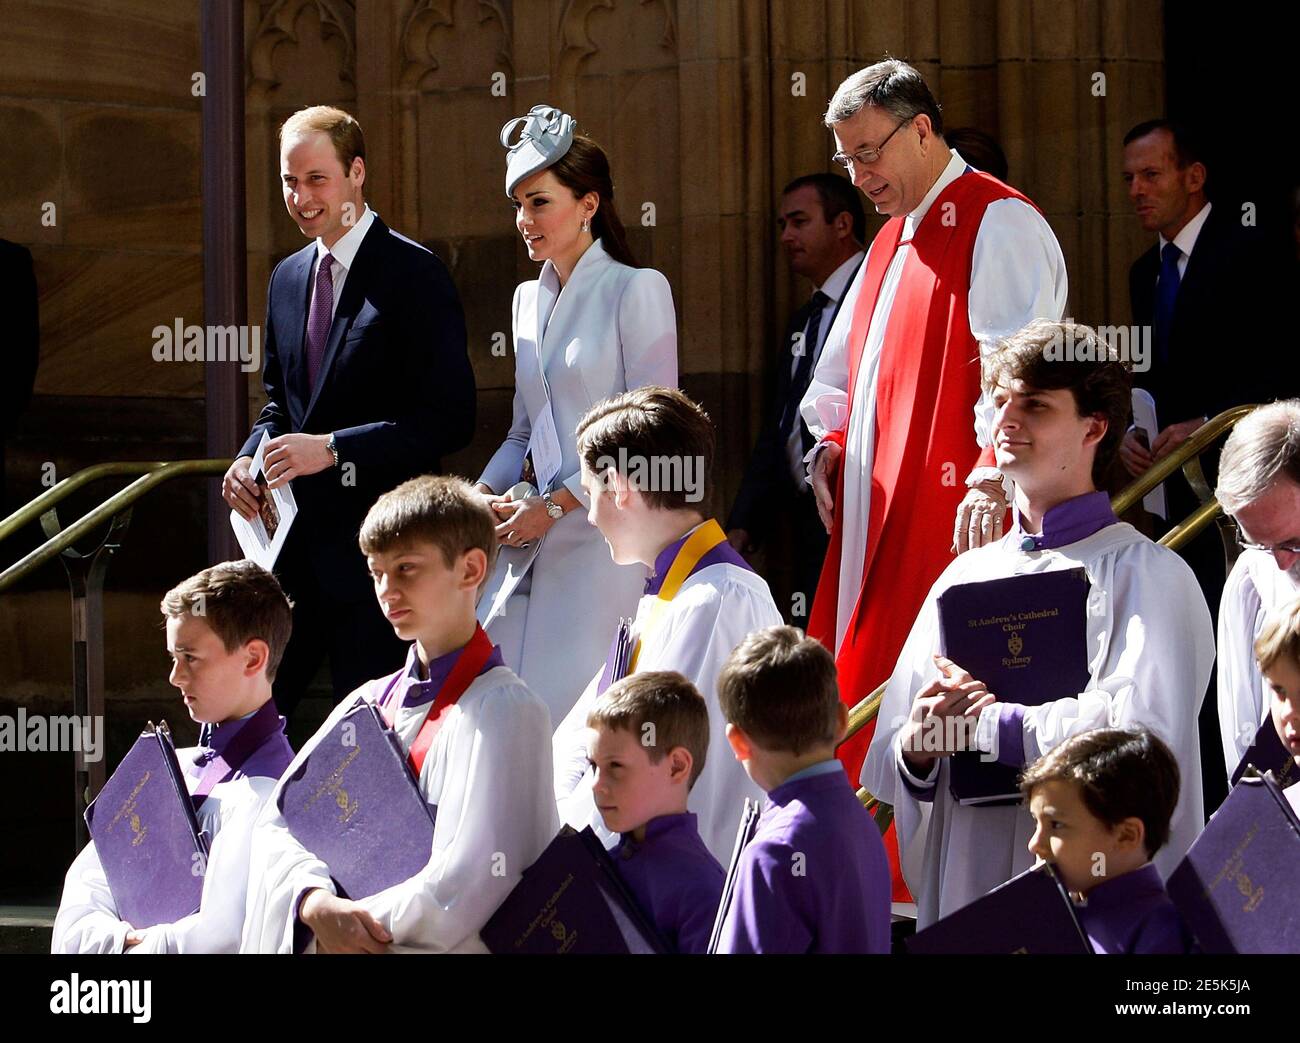 Britain's Prince William (L) and his wife Catherine, Duchess of Cambridge, (2nd L) stand alongside a choir, Archbishop of Sydney Glenn Davies (back C, in red) and Australian Prime Minister Tony Abbott (back R) following Easter Sunday Service at St Andrews Cathedral in Sydney, April 20, 2014. Britain's Prince William and his wife Kate are undertaking a 19-day official visit to New Zealand and Australia with their son George.   REUTERS/Lisa Maree Williams/Pool   (AUSTRALIA - Tags: ENTERTAINMENT ROYALS POLITICS RELIGION) Stock Photo